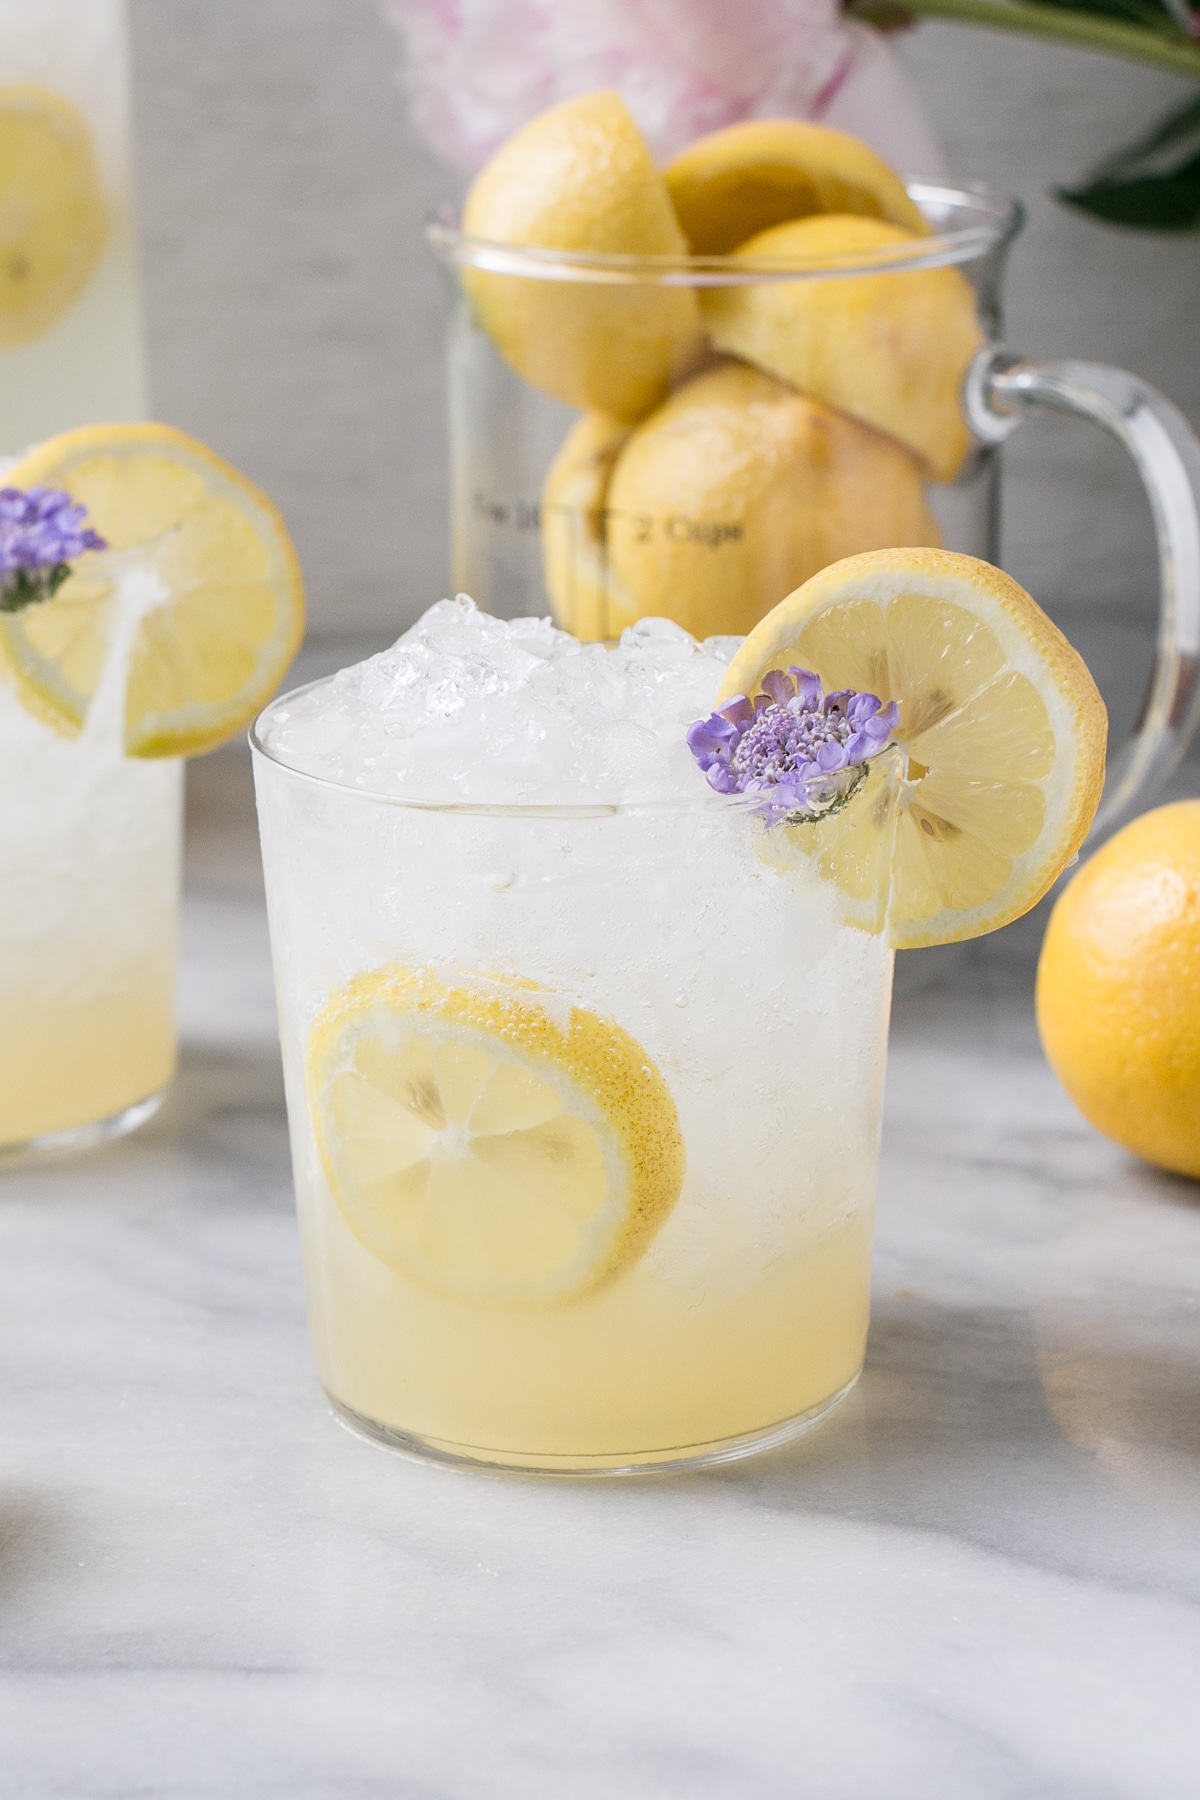 Sugar-Free Lemonade in glasses with lemon slices and a small purple flowers.